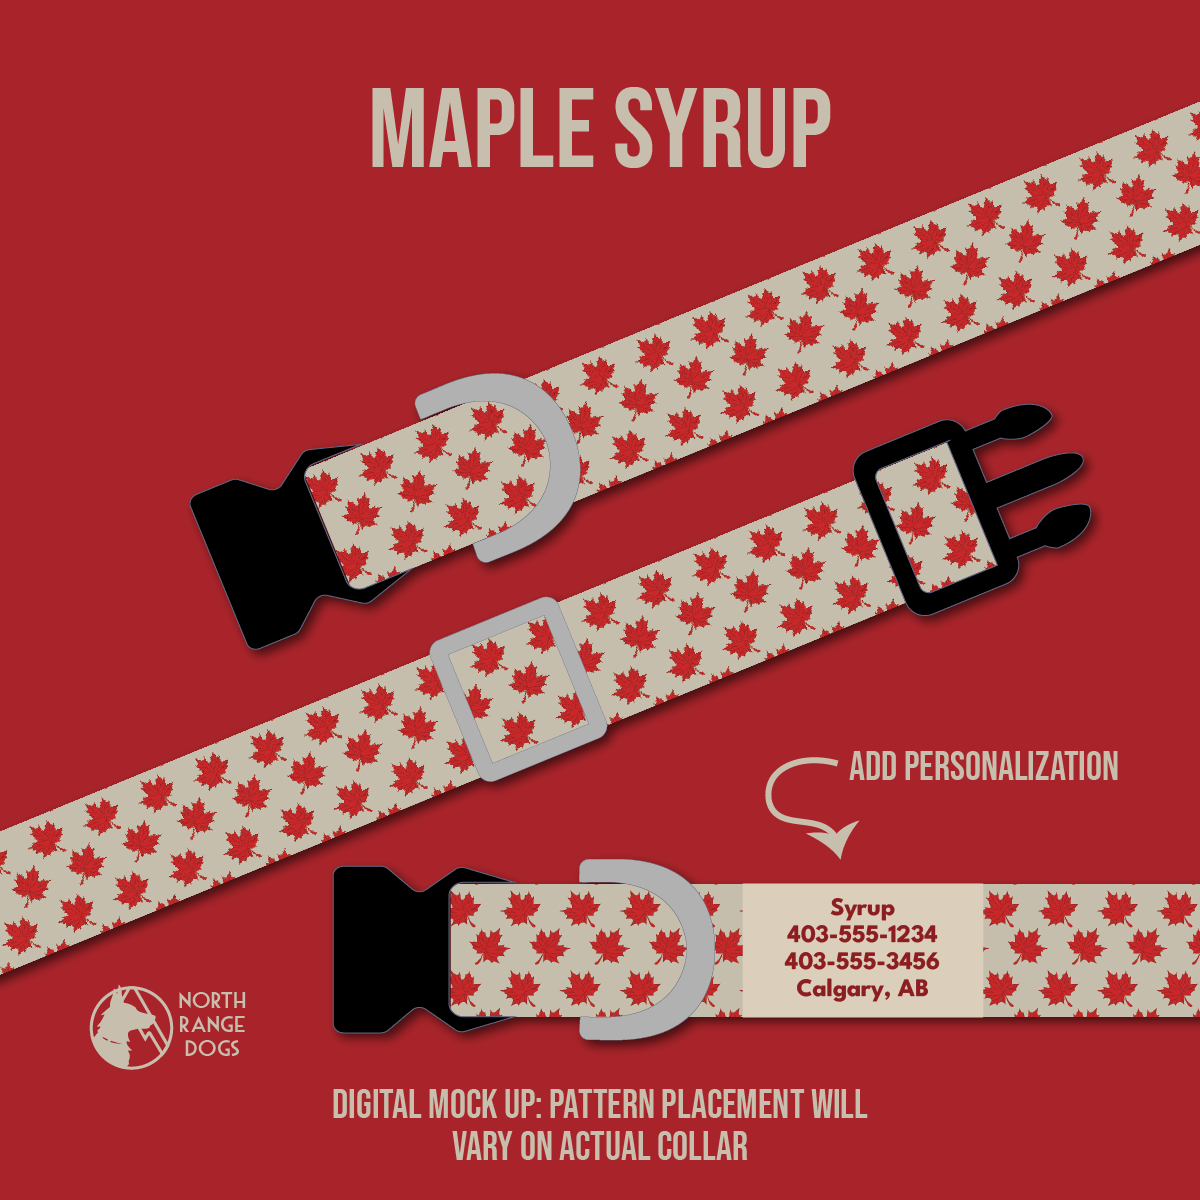 Maple Syrup - North Range Dogs